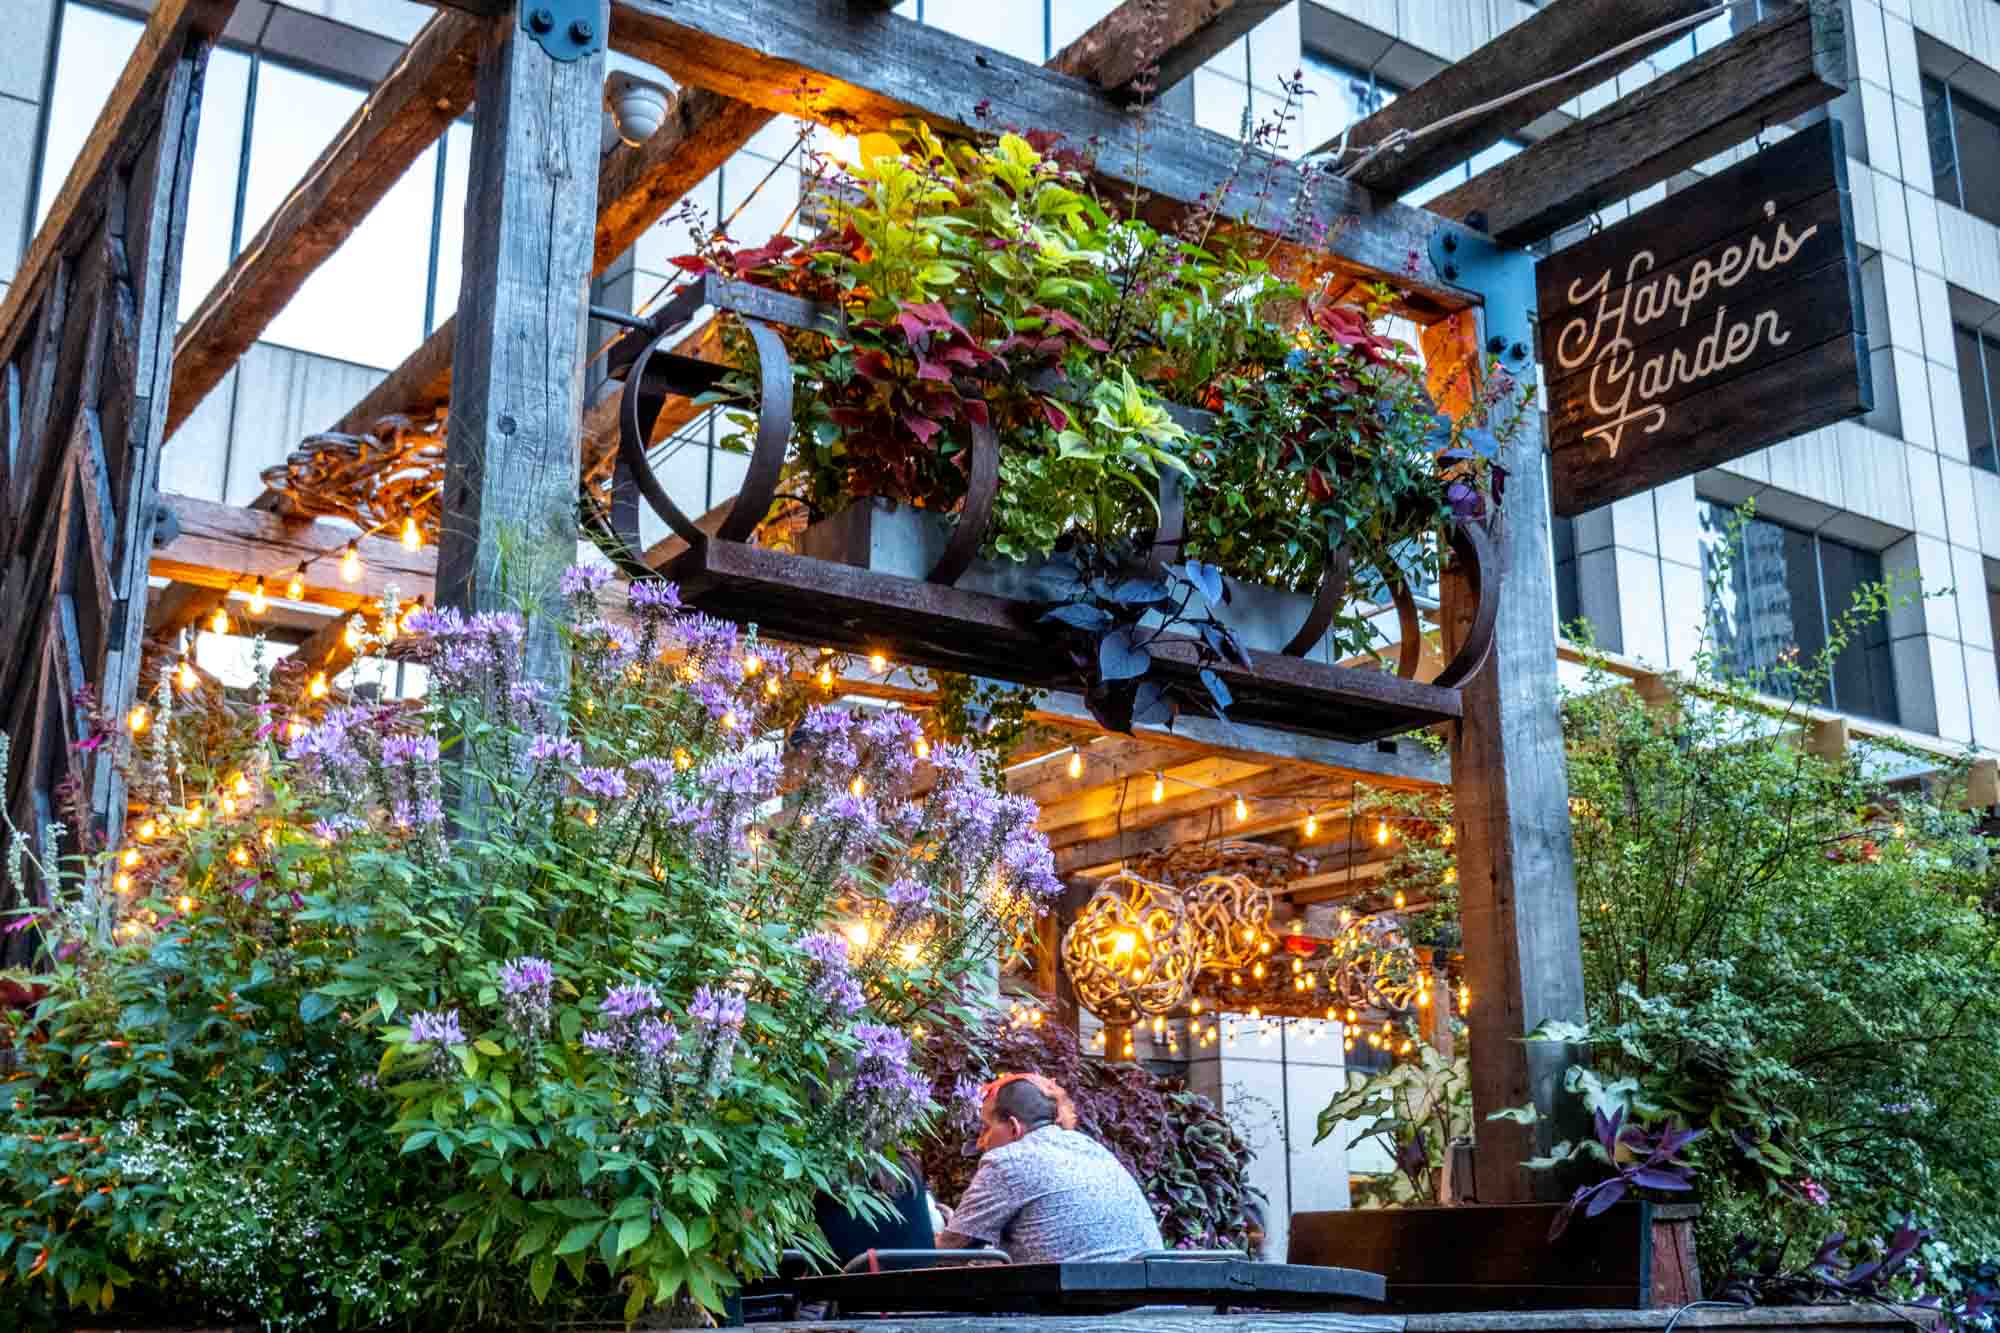 Person sitting on a restaurant patio filled with plants next to a sign for Harper's Garden.